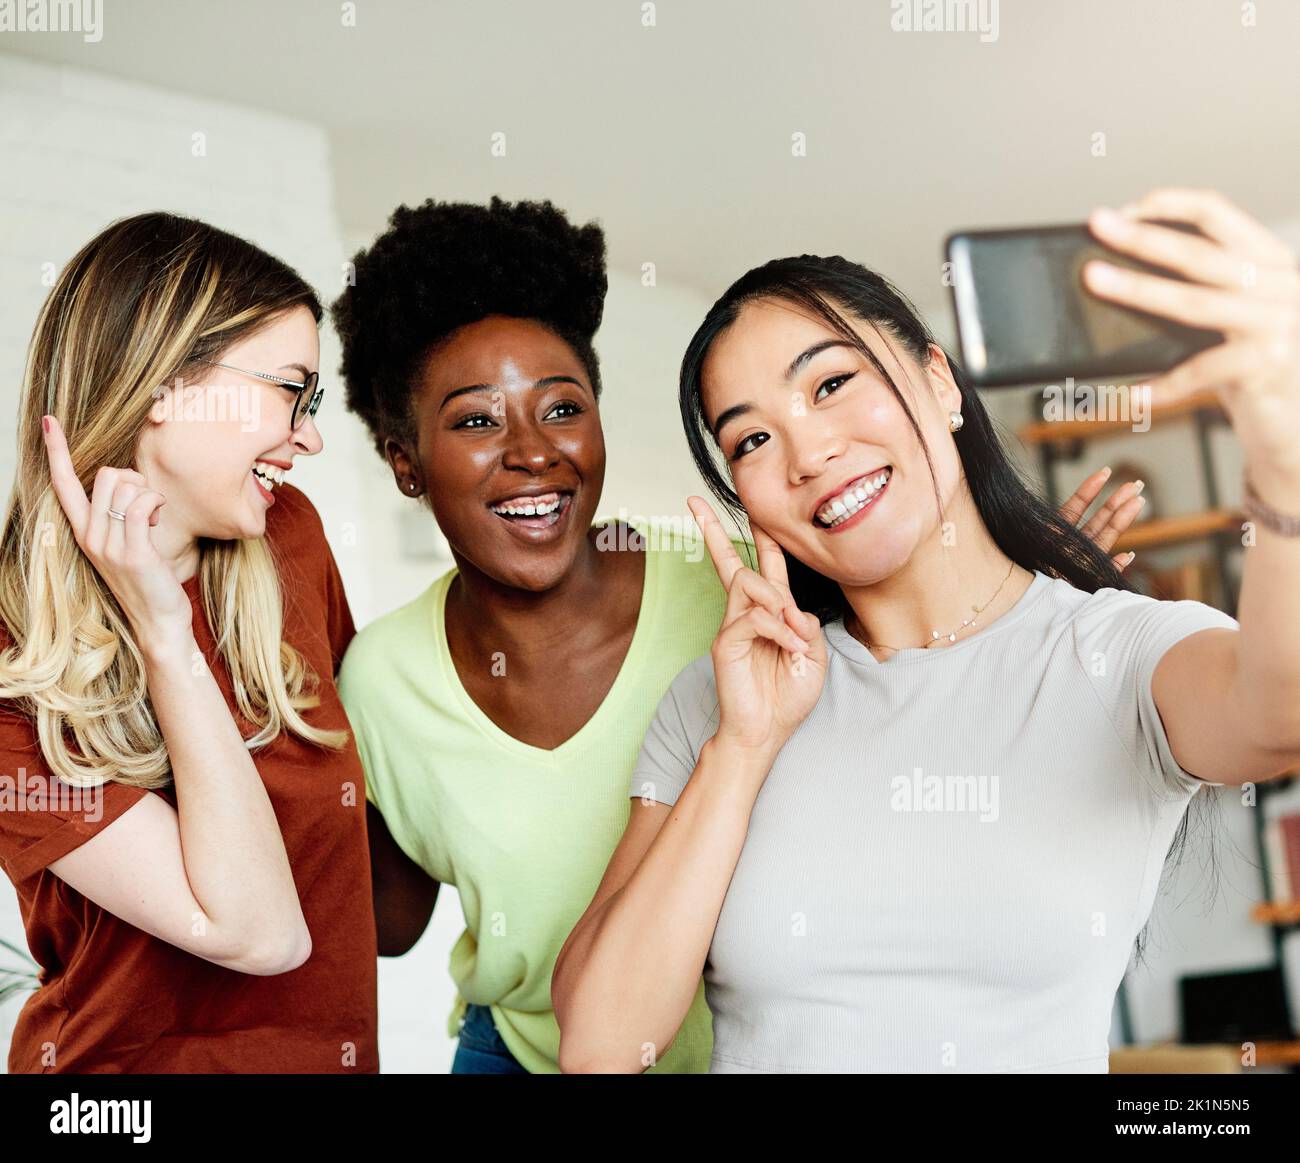 young people adult fun selfie friendship friend happy together group cheerful smiling diversity mixed ethnicity diverse black asian african american Stock Photo